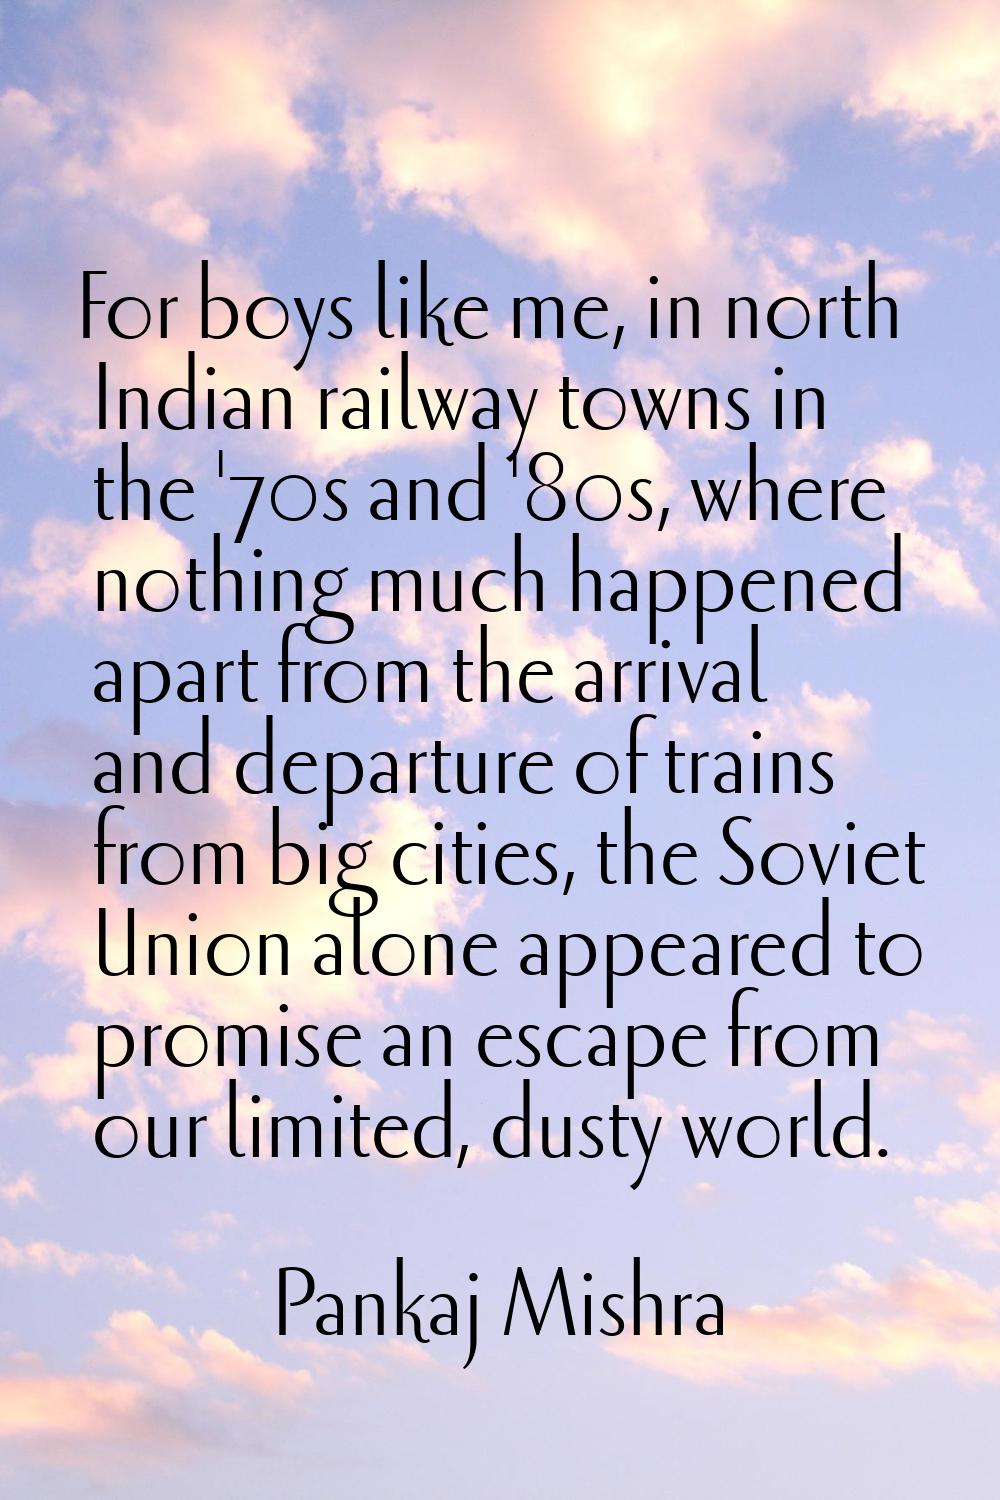 For boys like me, in north Indian railway towns in the '70s and '80s, where nothing much happened a